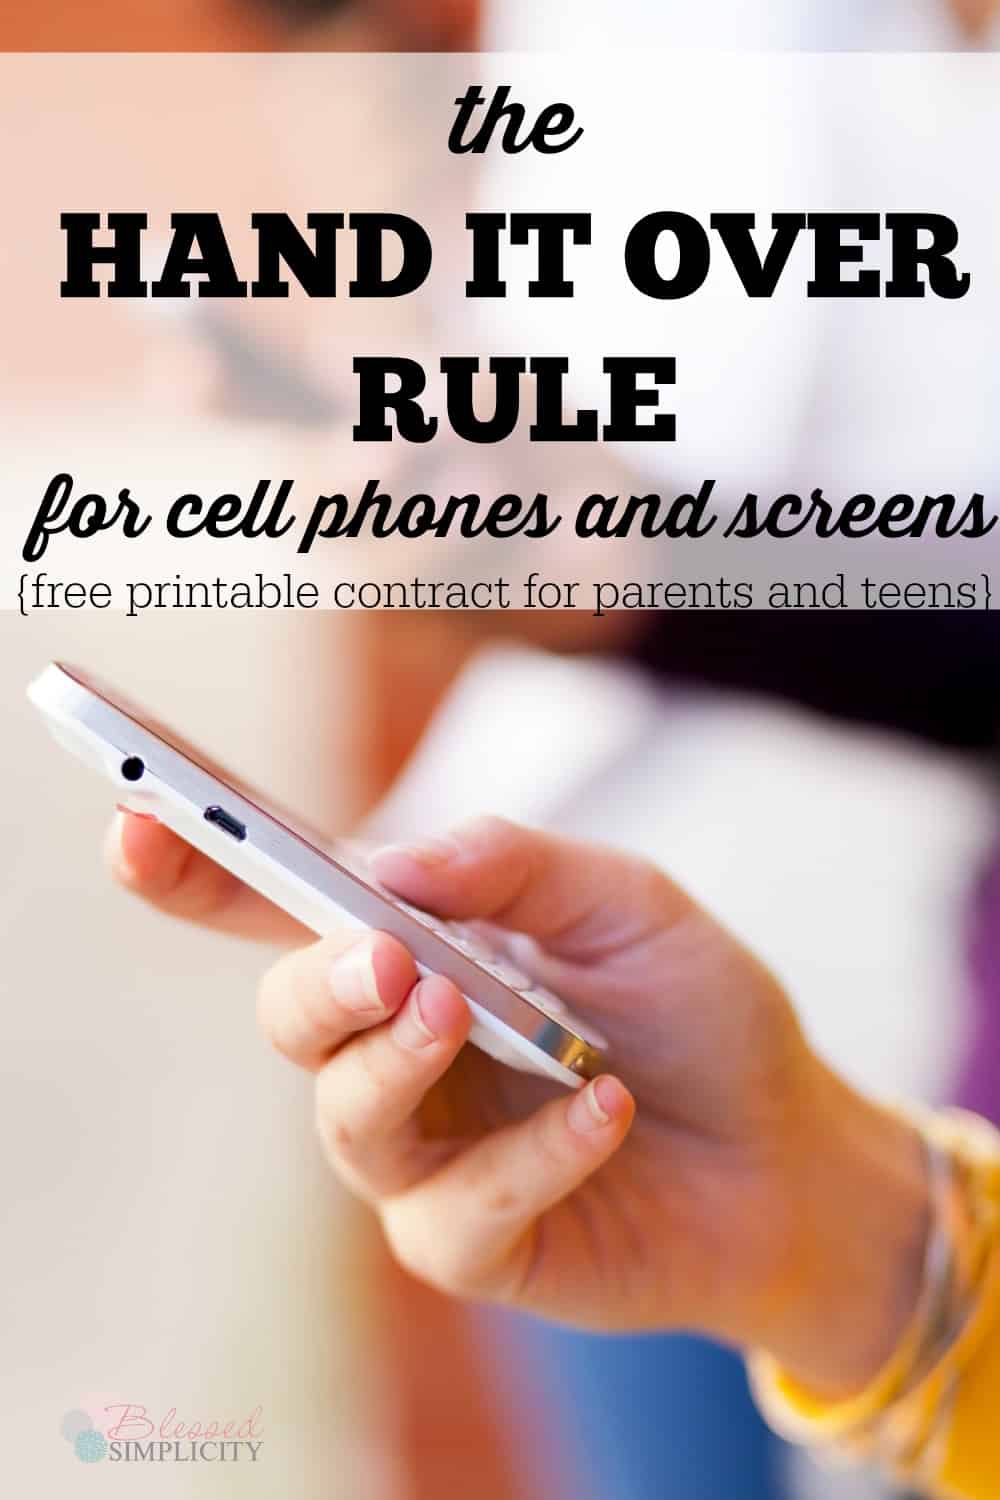 This rule and free printable contract for cell phones and screens with teens. Parenting made easier!